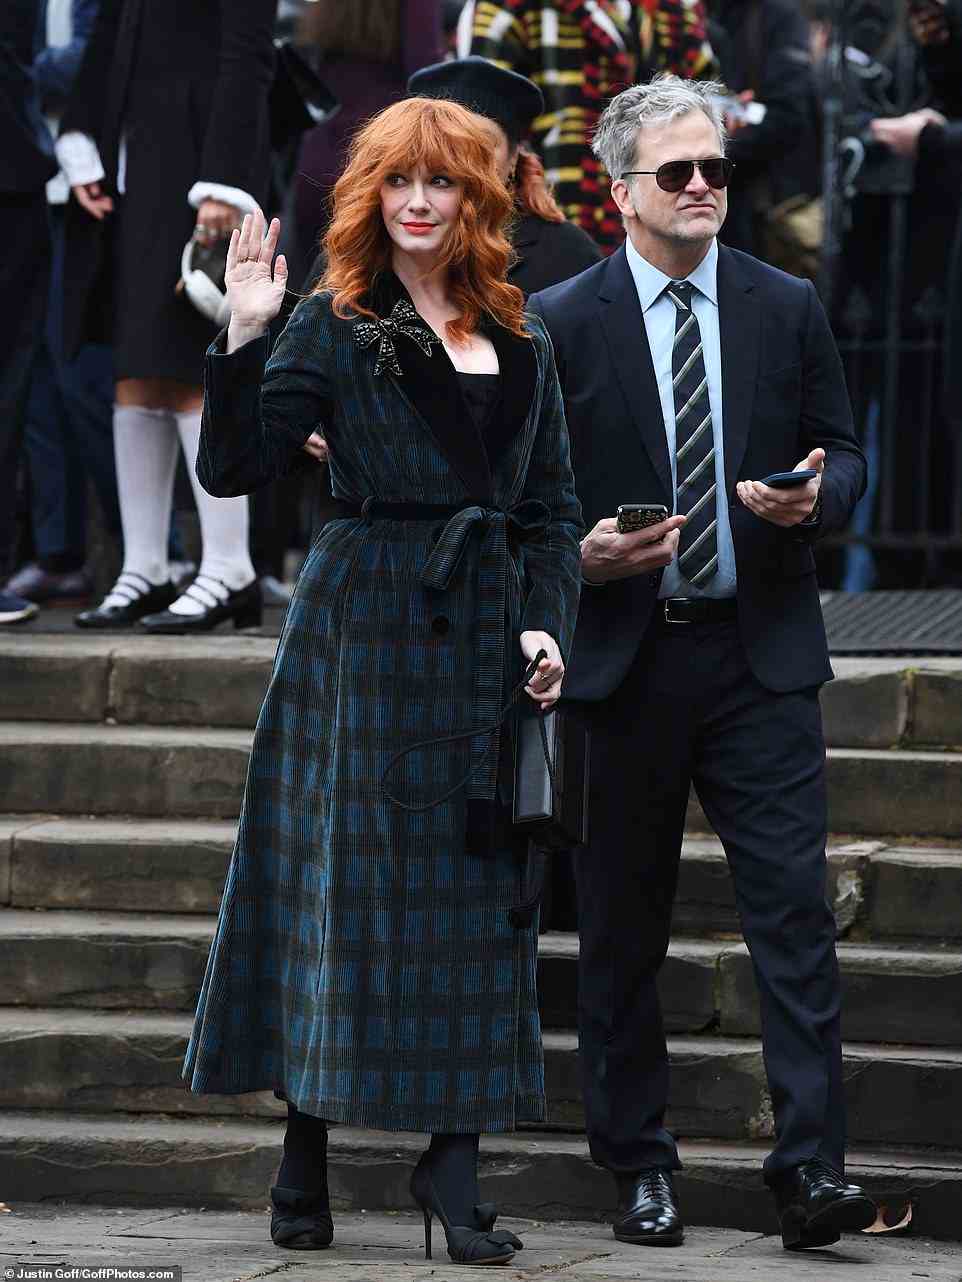 Christina Hendricks arriving to the private memorial for Vivienne Westwood today